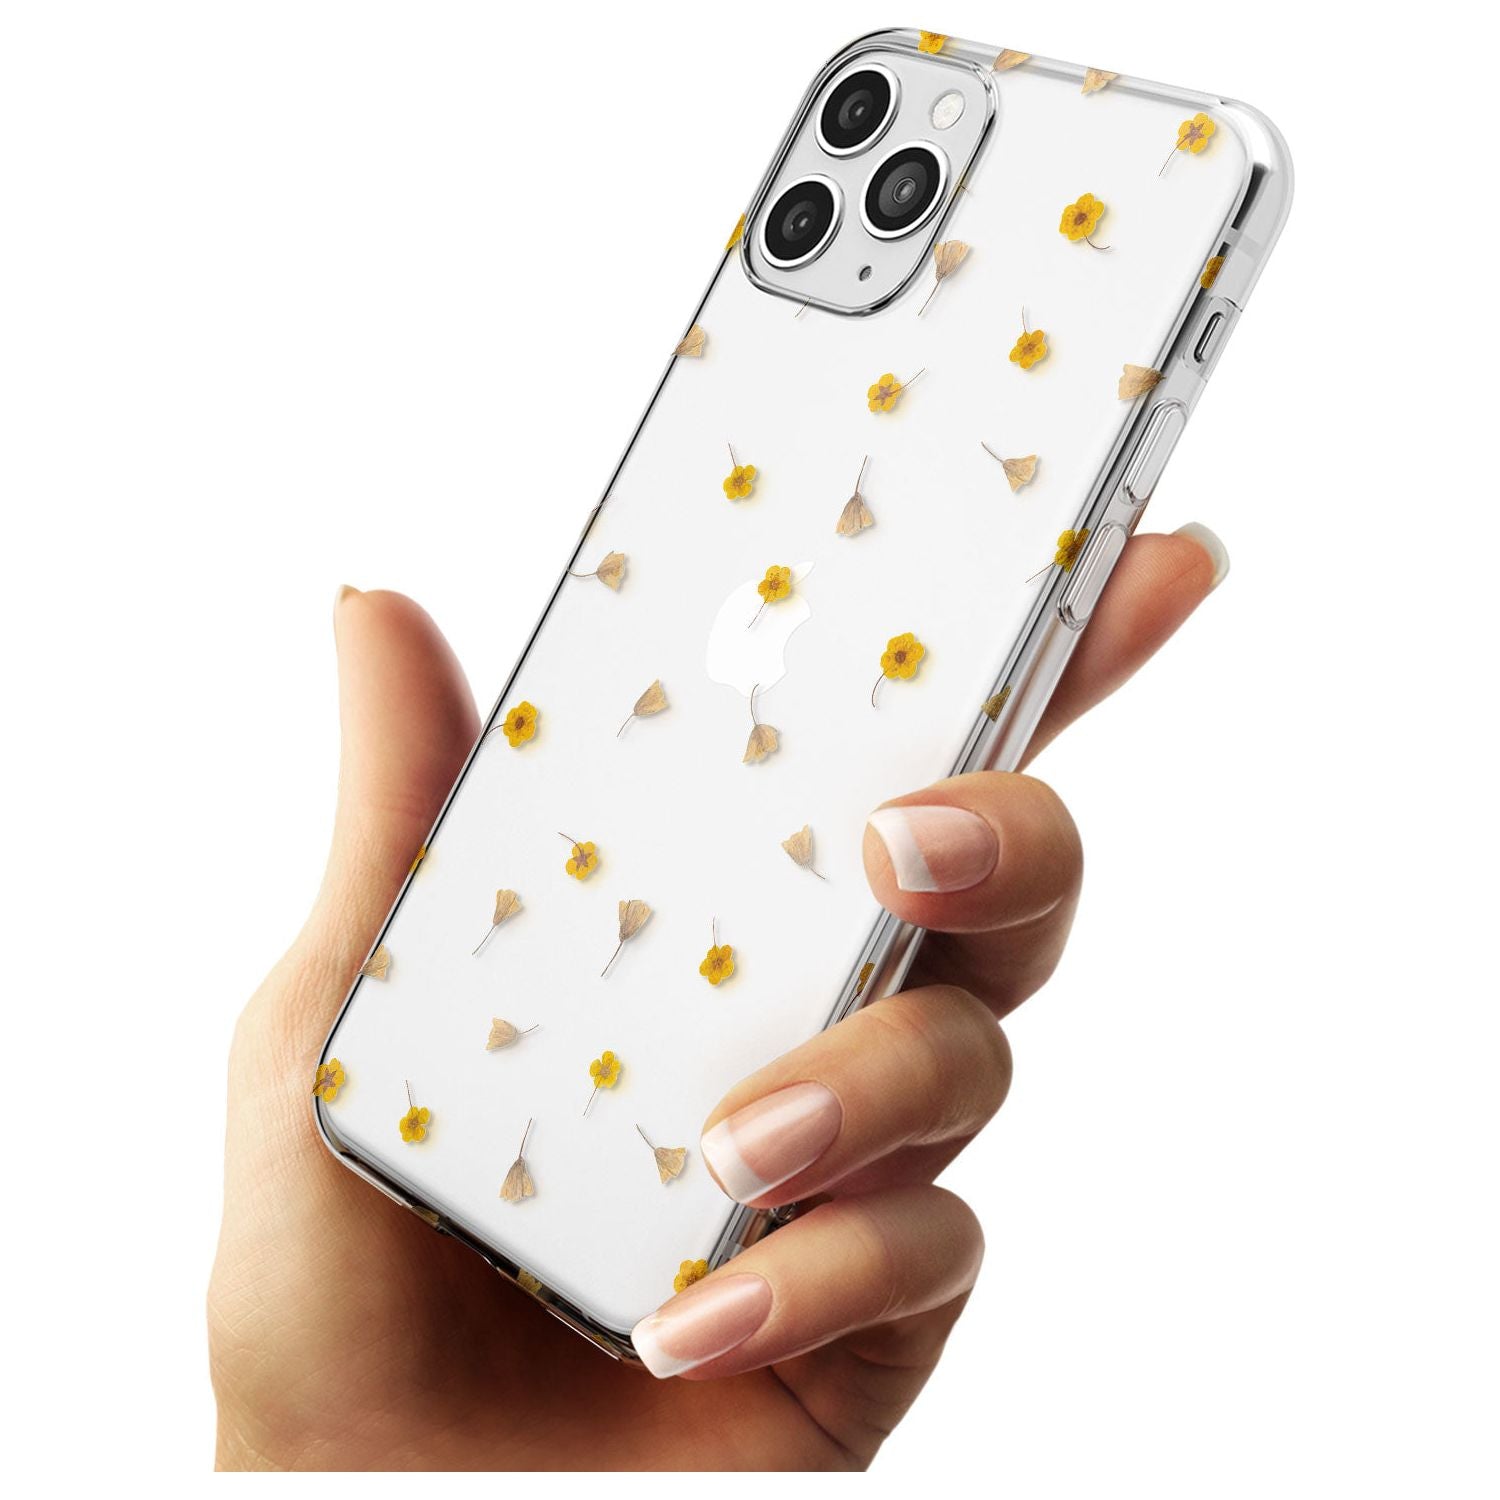 Small Flower Mix - Dried Flower-Inspired Design Slim TPU Phone Case for iPhone 11 Pro Max